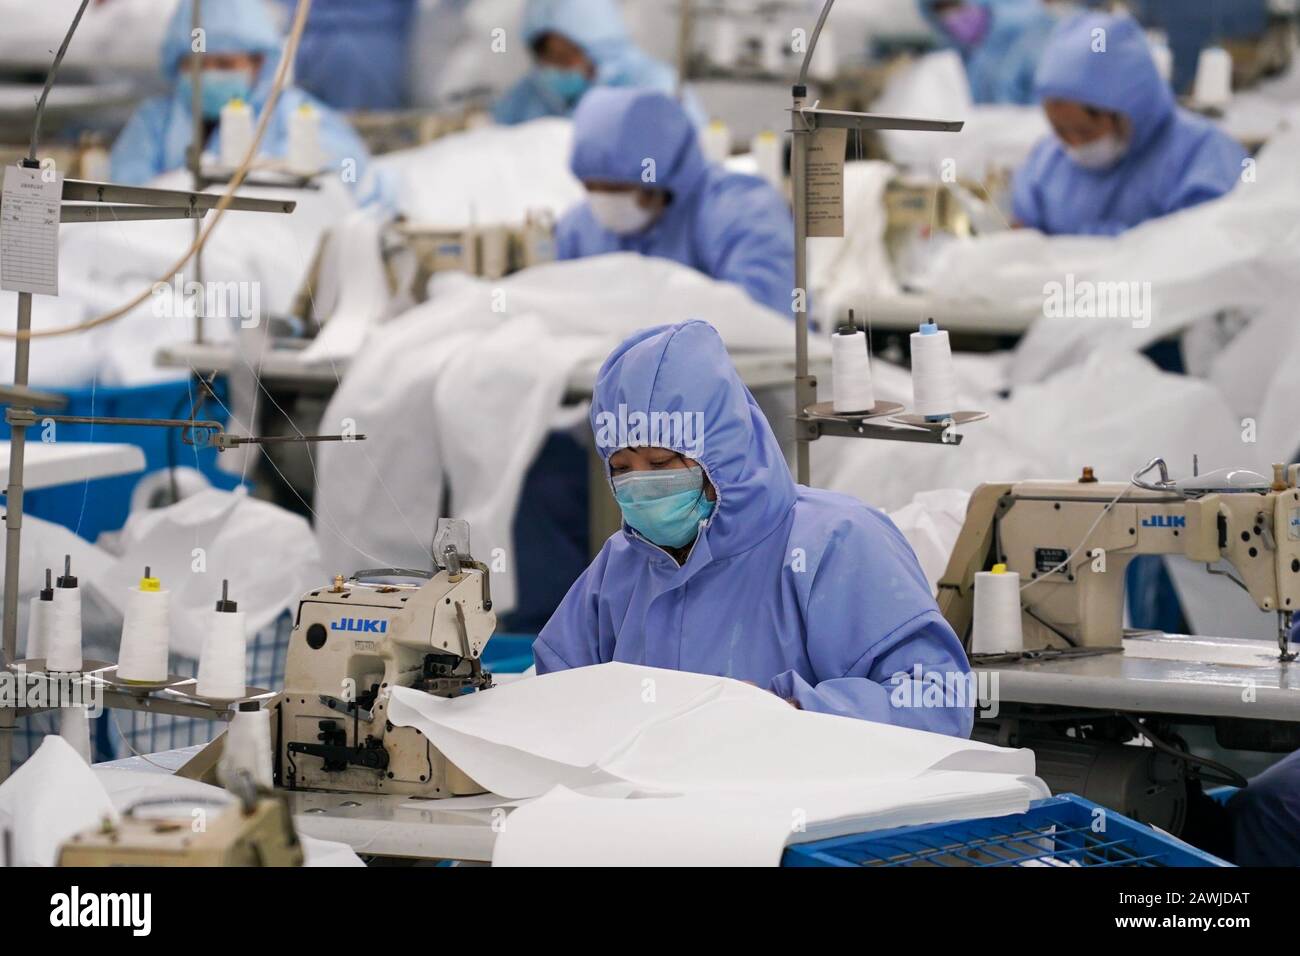 (200209) -- BEIJING, Feb. 9, 2020 (Xinhua) -- Workers make protective suits for general purposes at a production line of Hodo Group, a private-owned garment company in Wuxi, east China's Jiangsu Province, Feb. 8, 2020. (Xinhua/Li Bo) Stock Photo